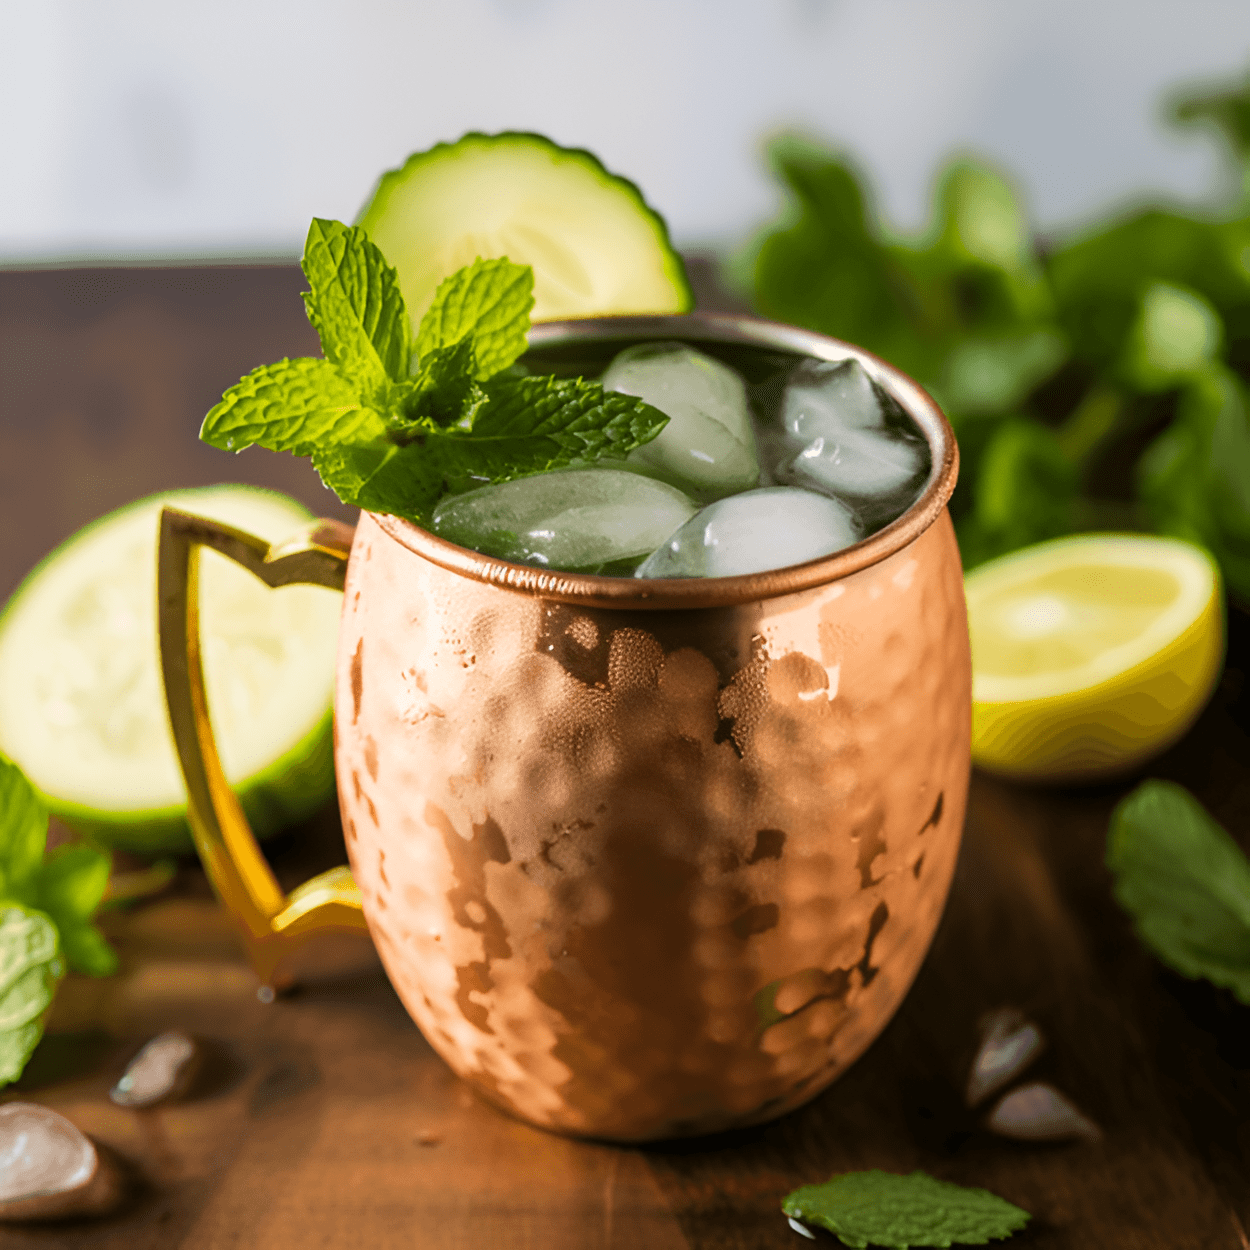 Cucumber Mint Mule Cocktail Recipe - The Cucumber Mint Mule is a refreshing, crisp, and slightly spicy cocktail. The cucumber provides a cool, earthy flavor, while the mint adds a touch of sweetness and freshness. The ginger beer brings a spicy kick, and the lime juice balances everything out with a bit of tartness.